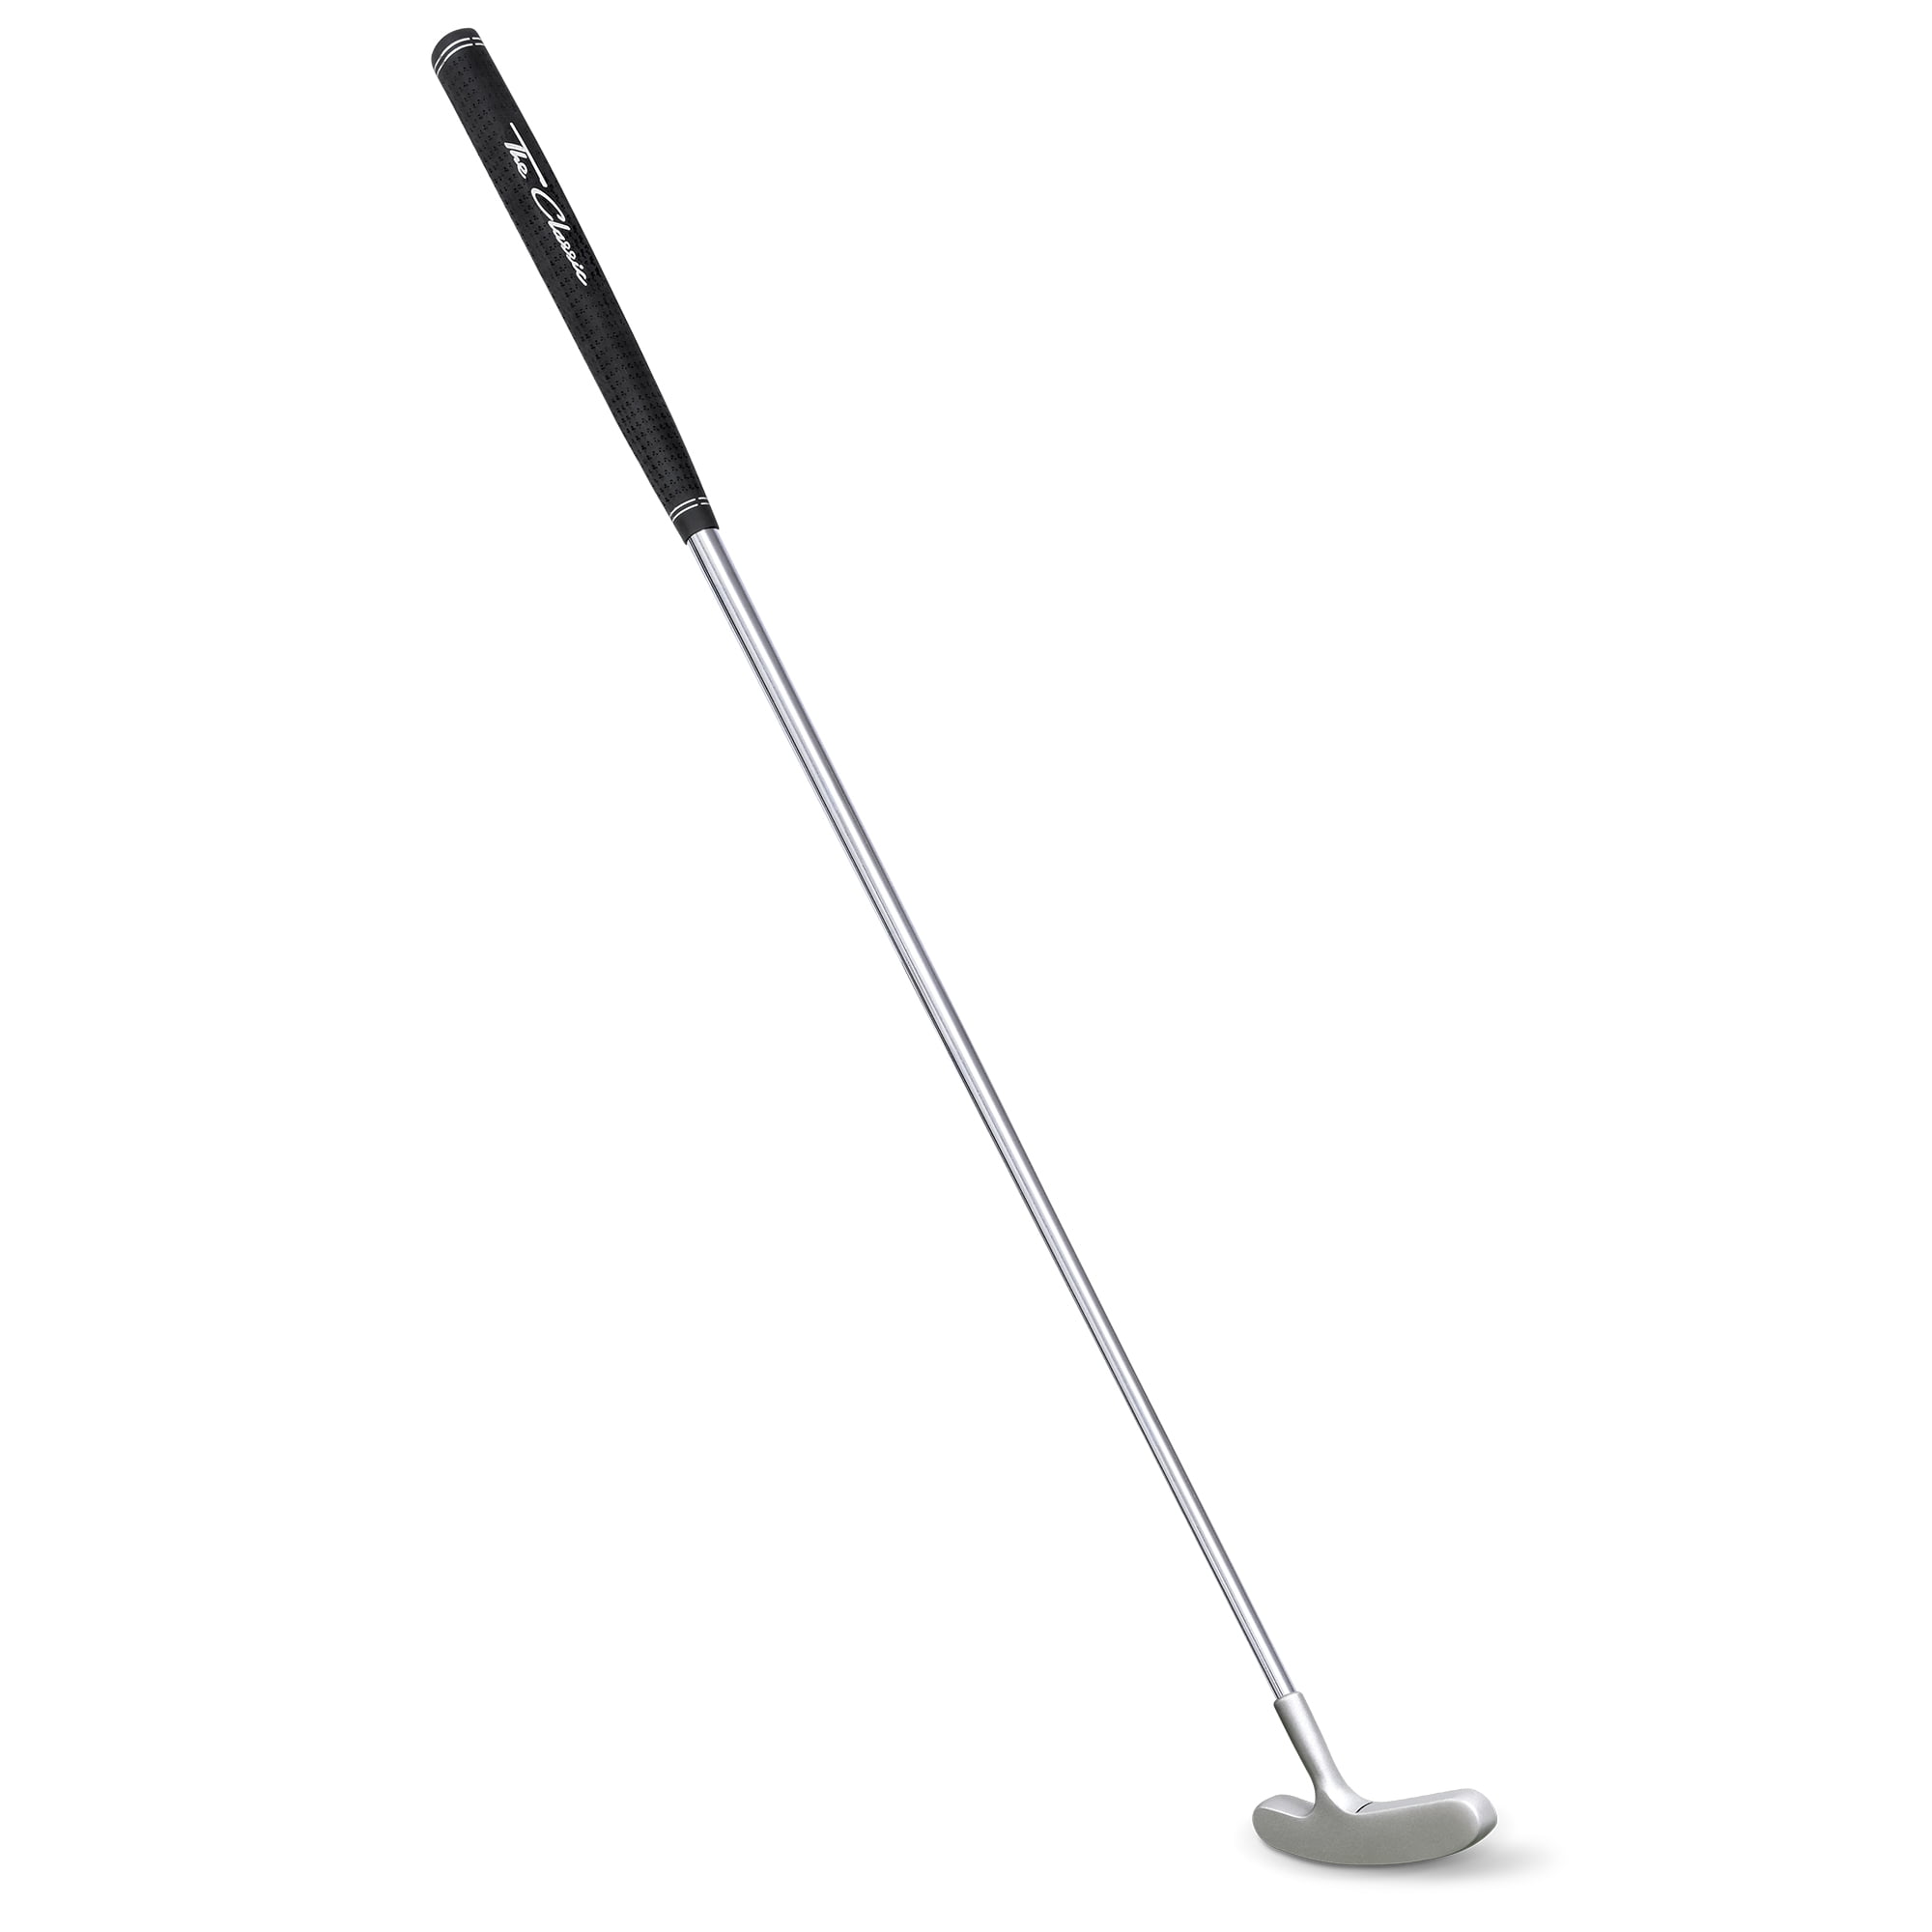 The Classic Golf Putter by GoSports - Premium Grip and Classic 2 Way Head